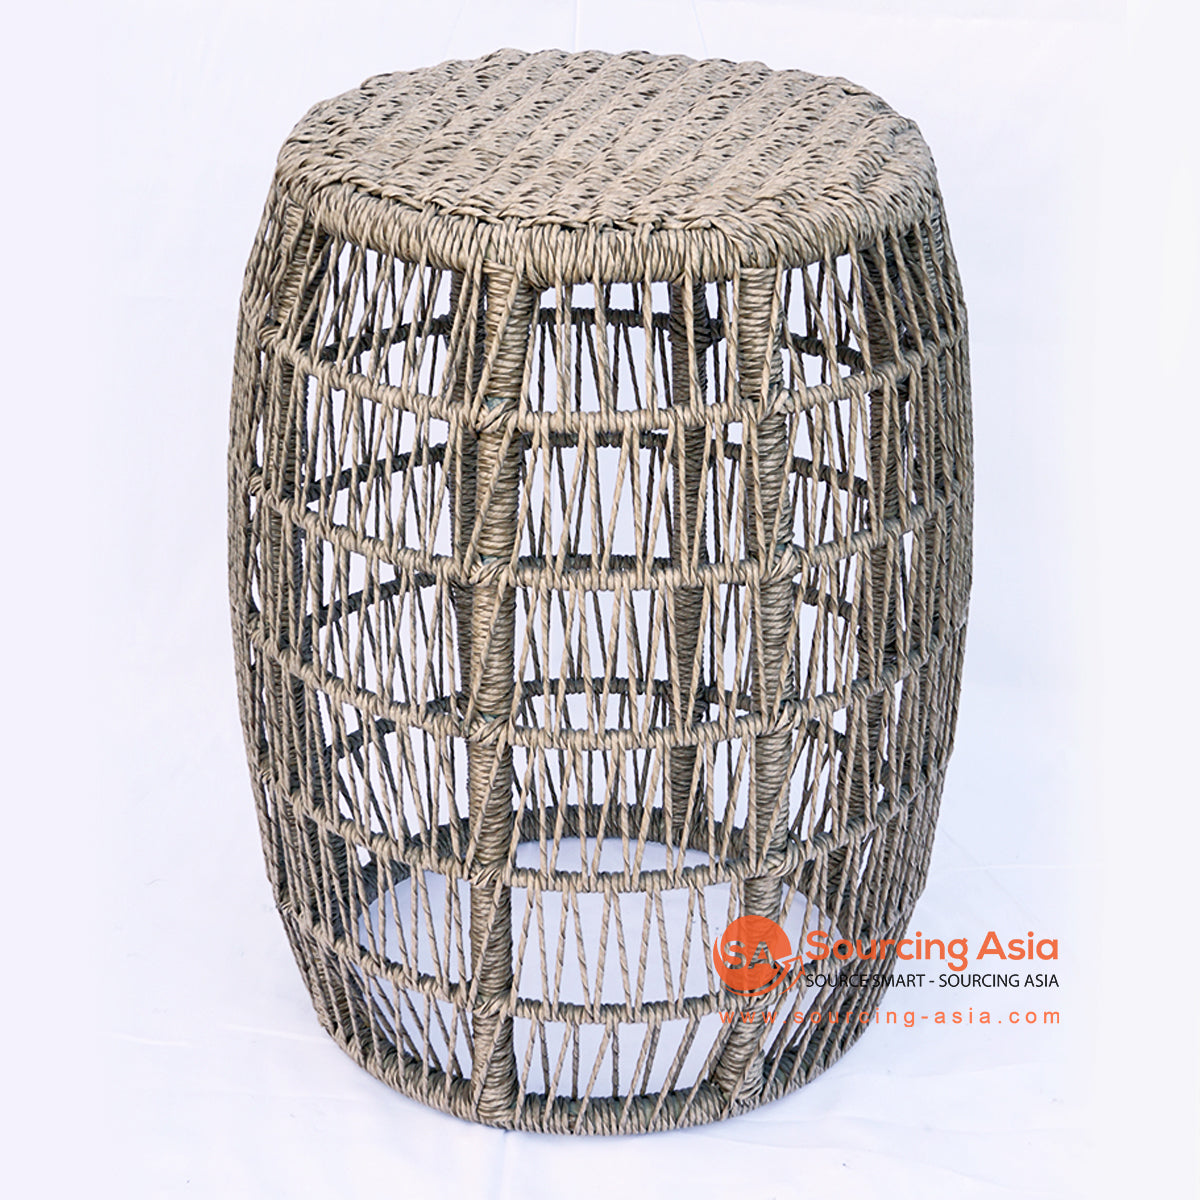 BNTC006-1 SYNTHETIC RATTAN GAPED SIDE TABLE